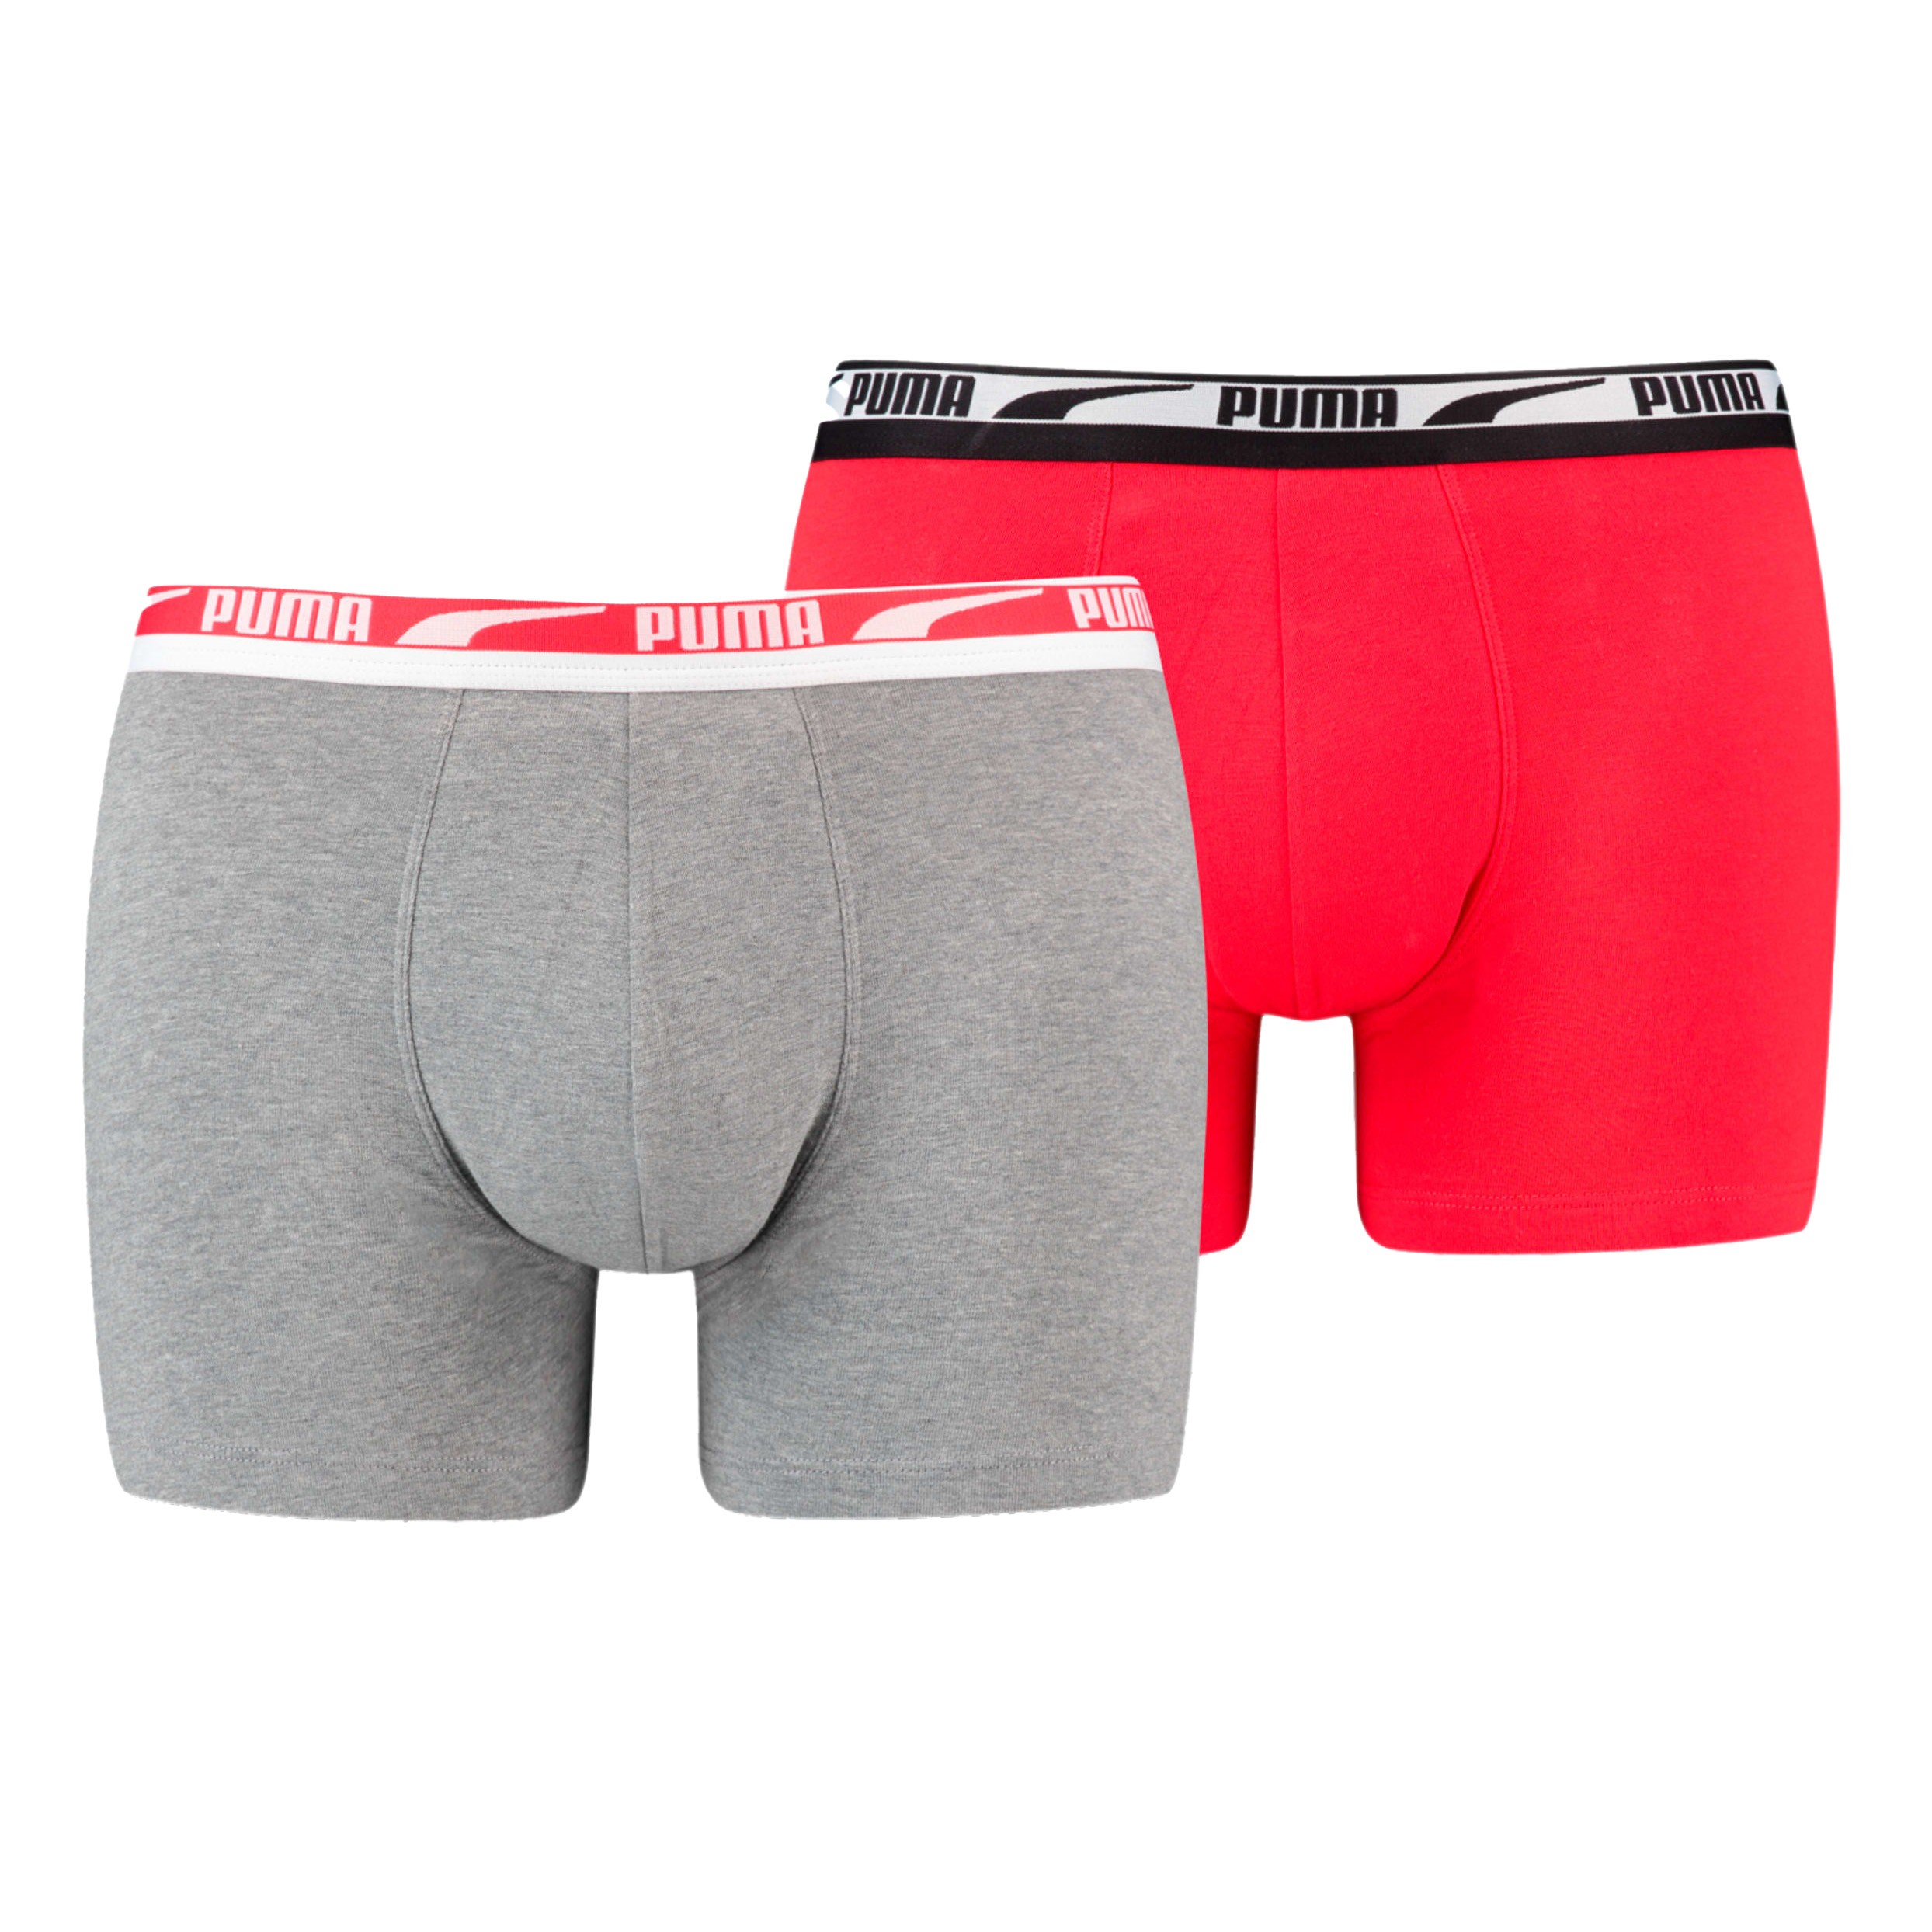 Set of 2 boxers Multi logo PUMA - grey and red: Packs for man brand